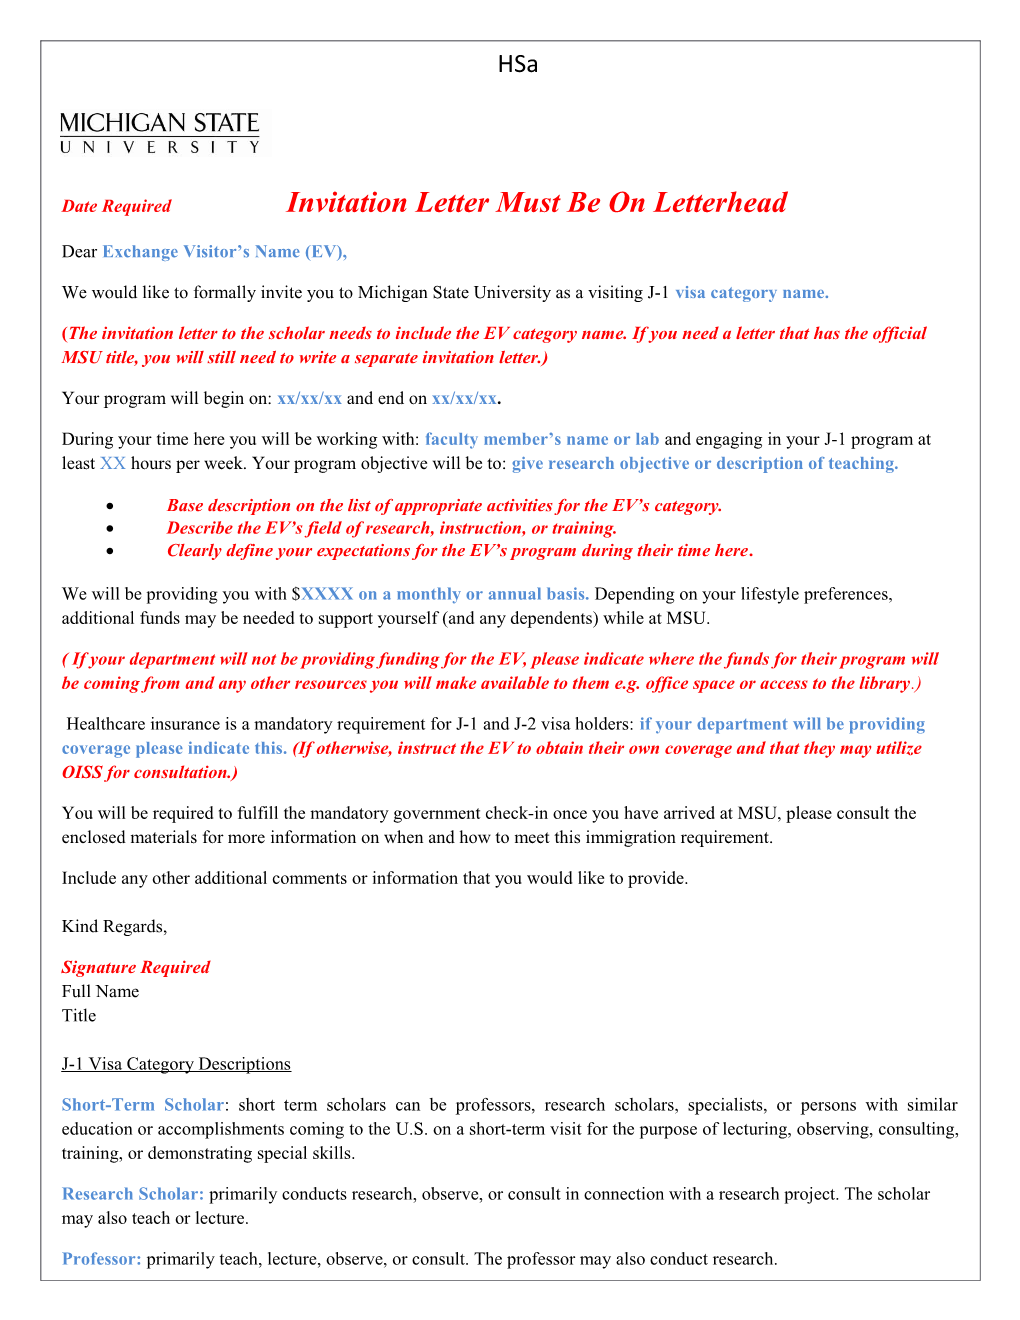 Date Requiredinvitation Letter Must Be on Letterhead